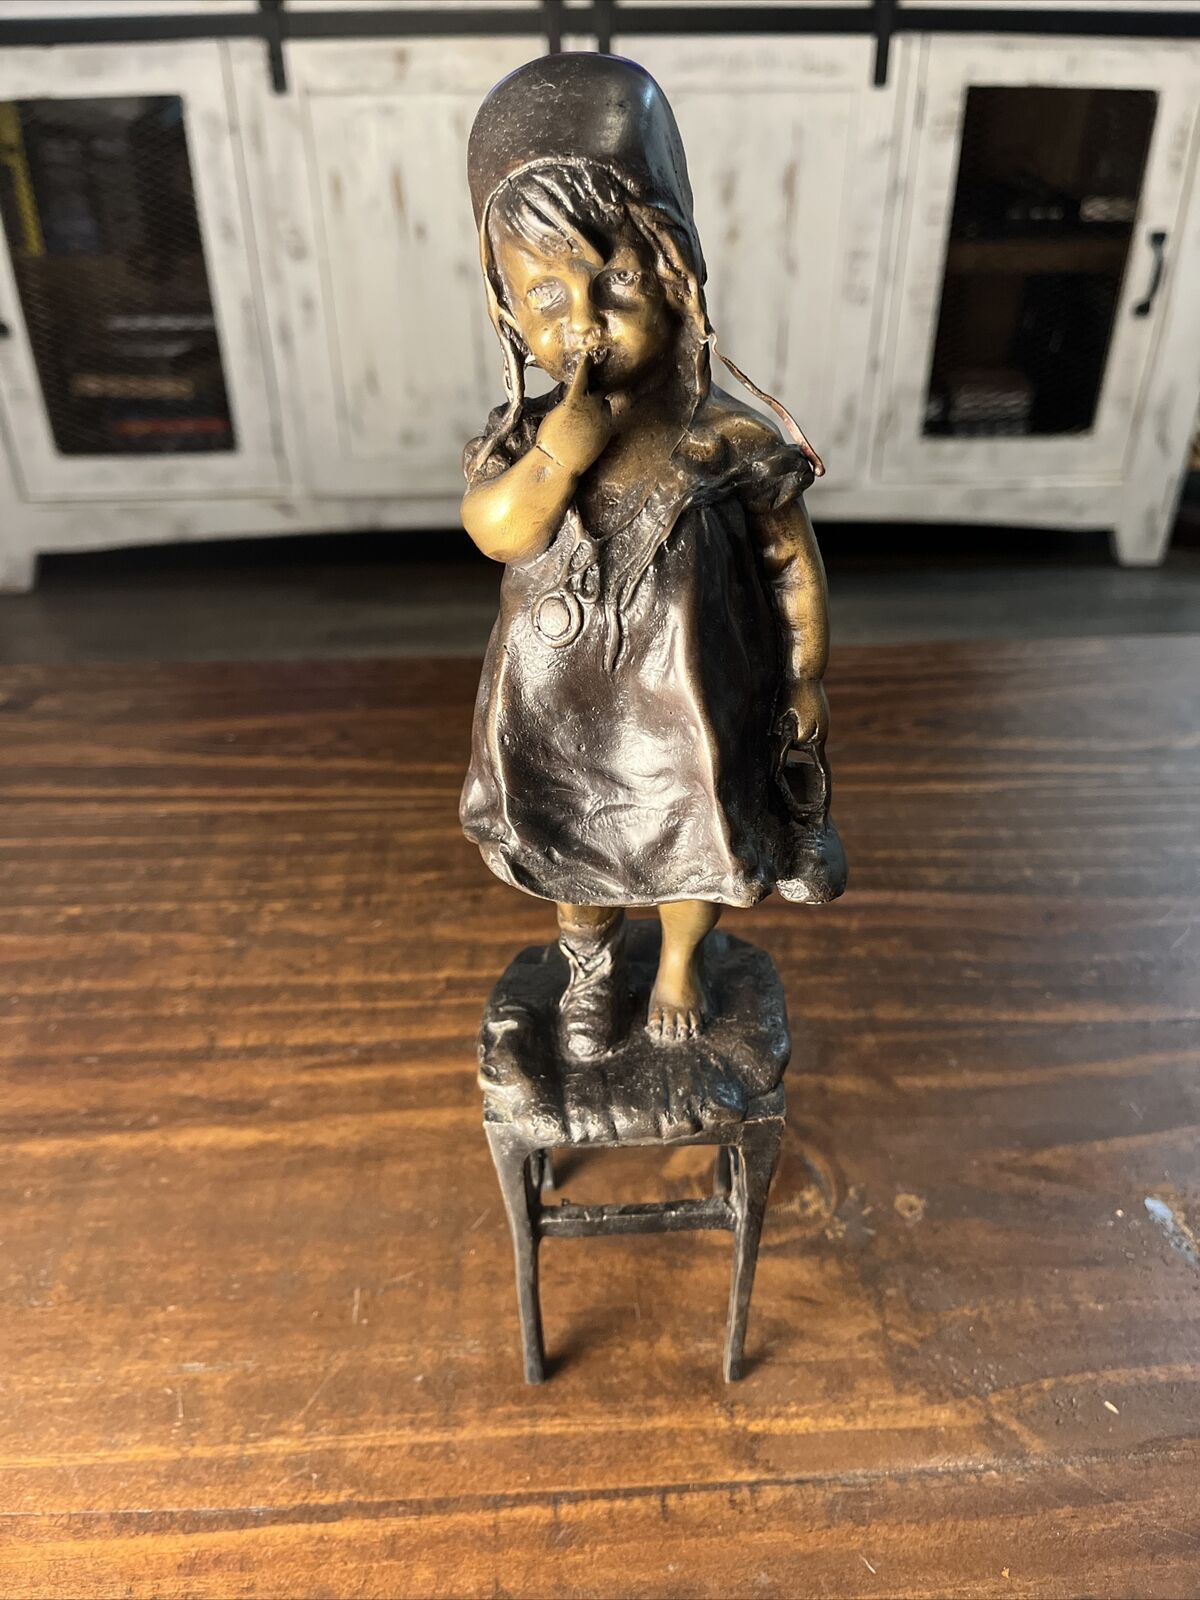 MAGNIFICENT 1900s BRONZE OF A GIRL STANDING ON A CHAIR BY JUAN CLARA